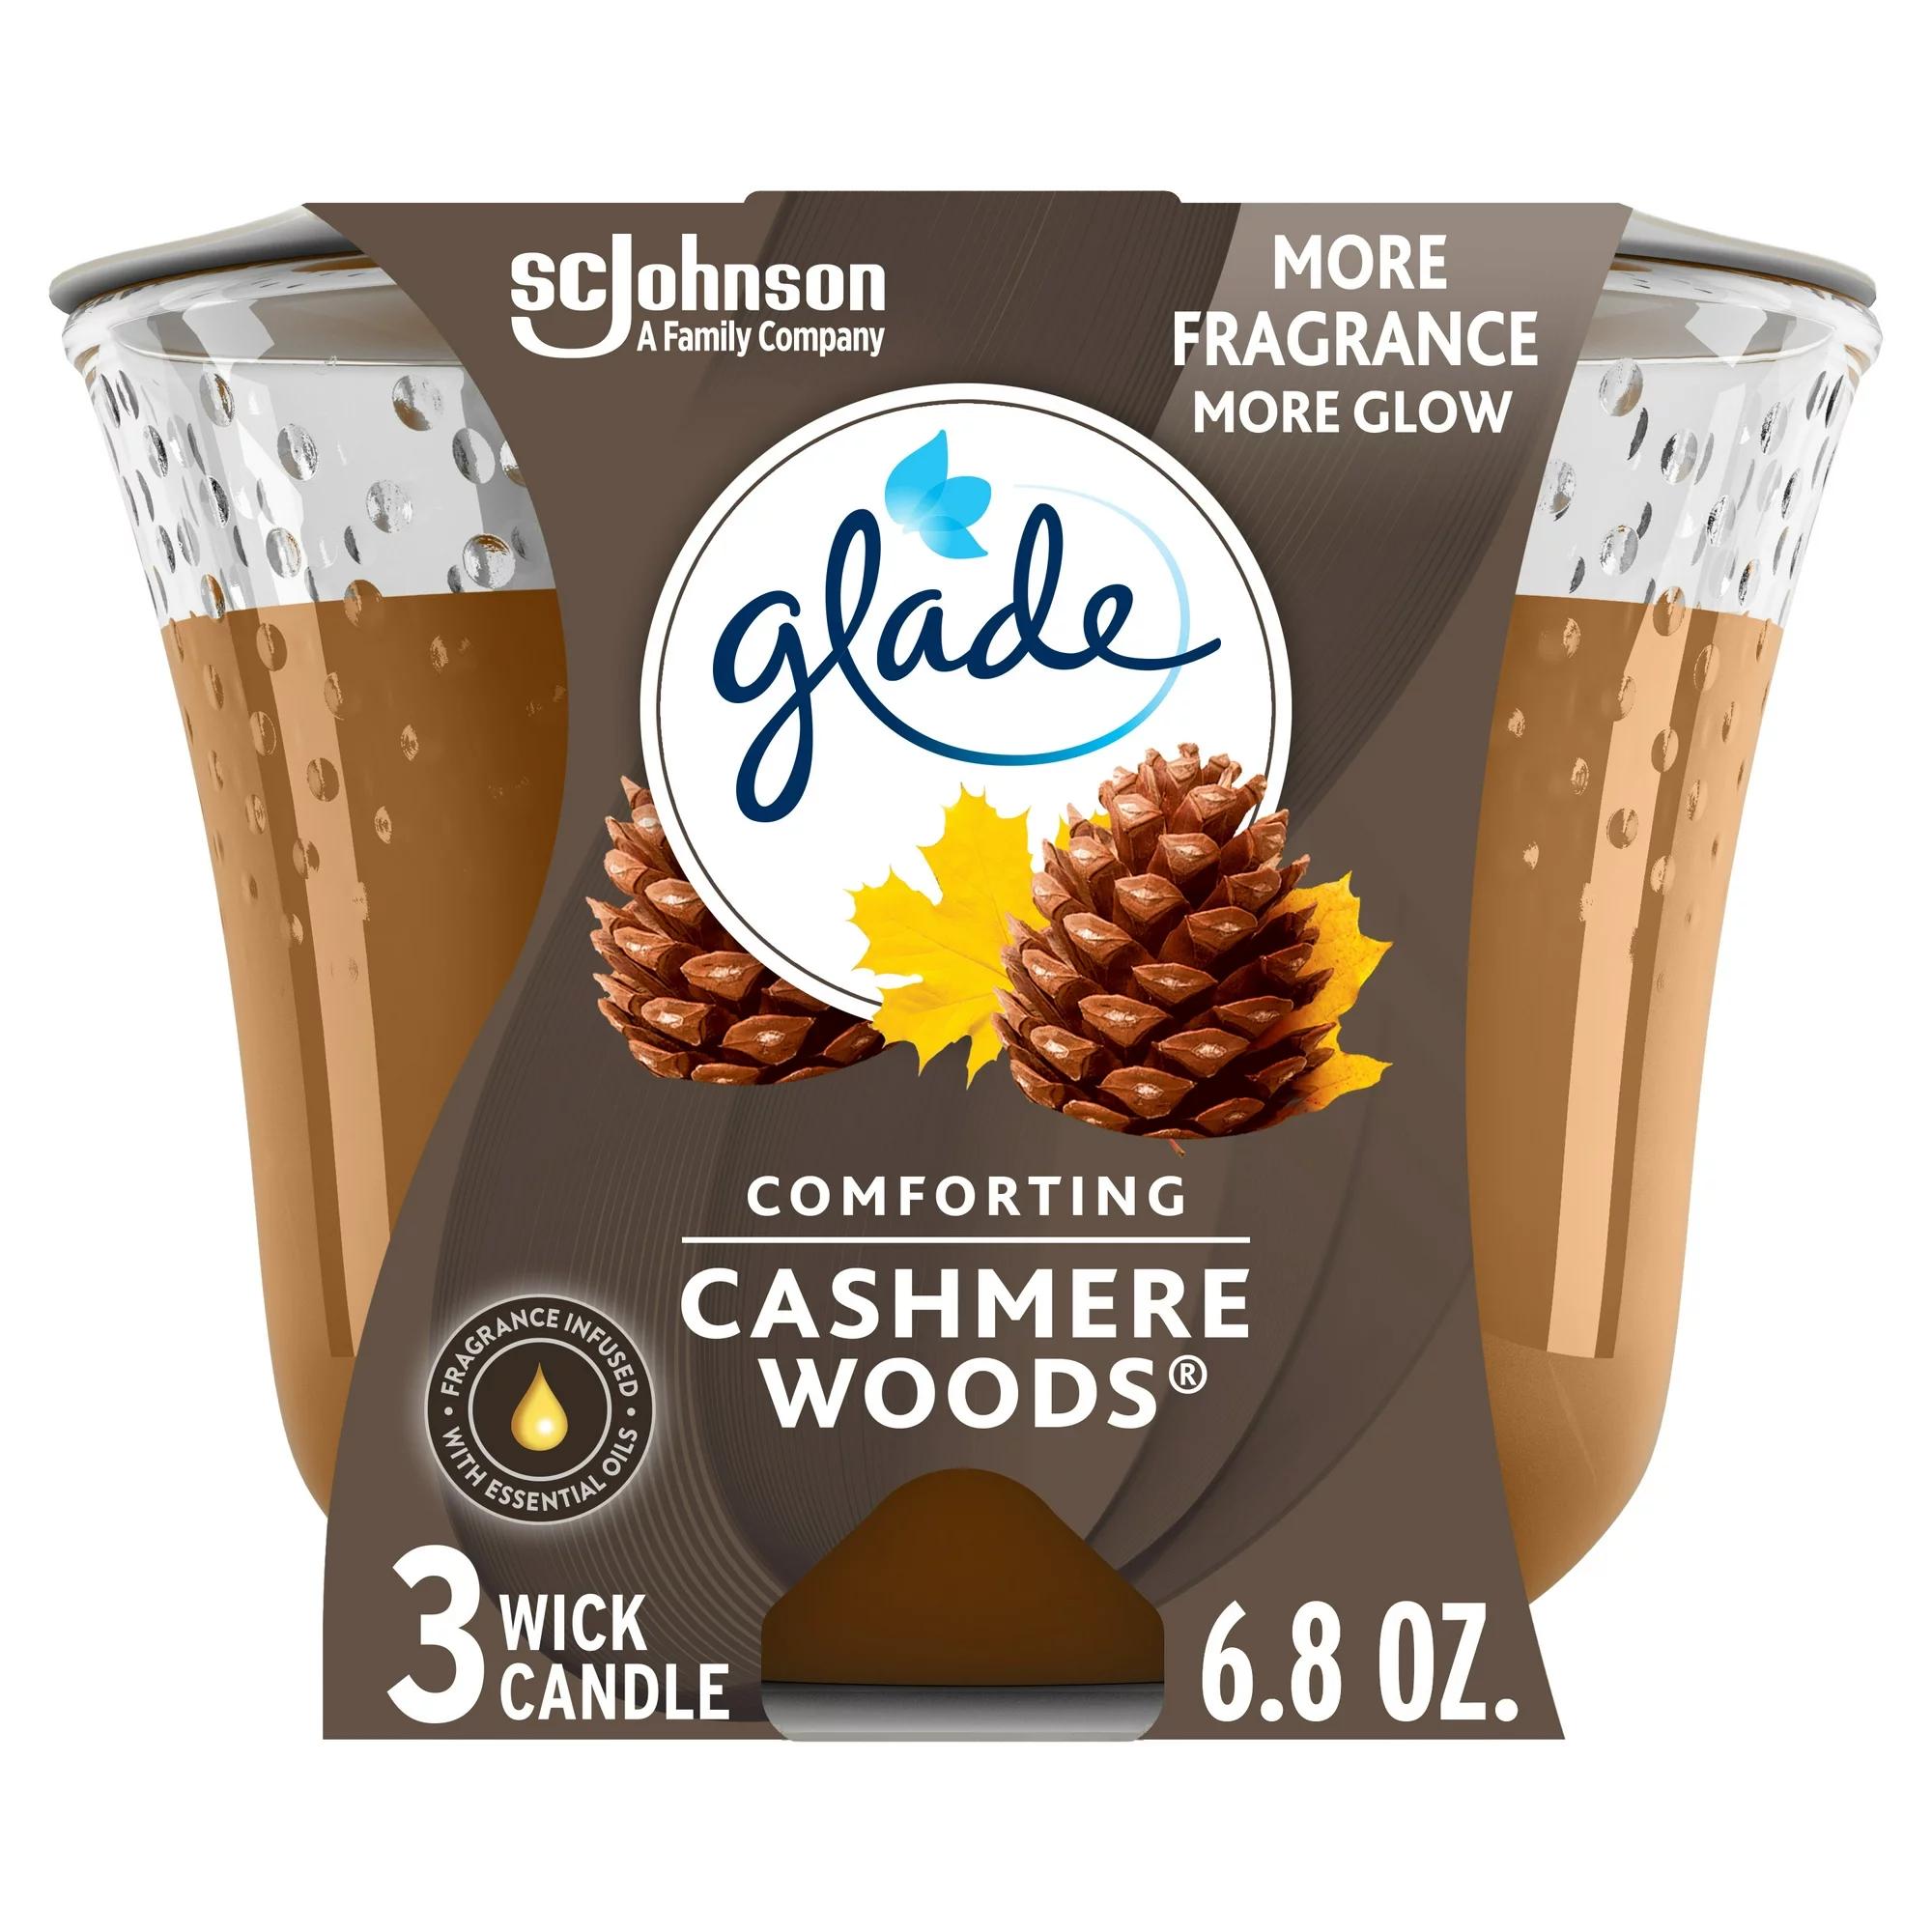 glade-candle-coupons